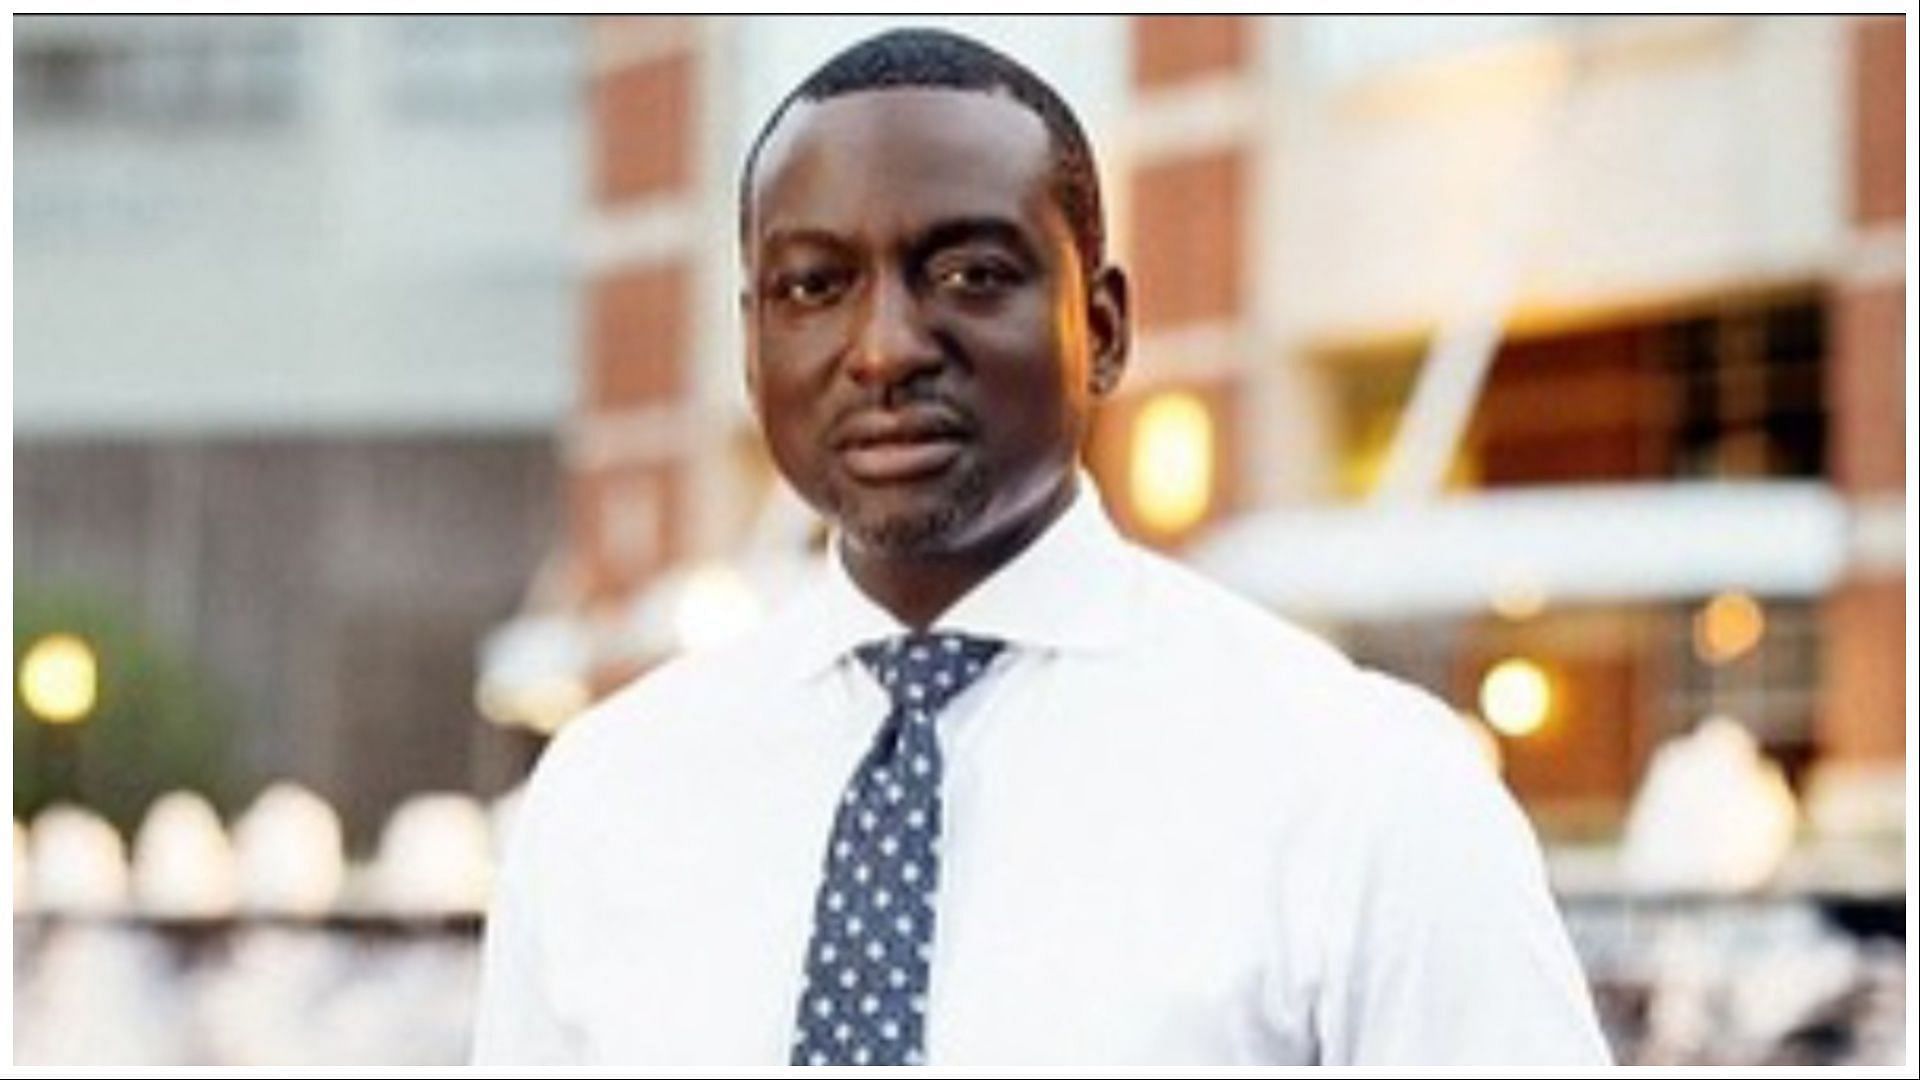 Yusef Salaam was pulled over in a traffic stop on Friday, (Image via @dr.yusefsalaam/Instagram) 